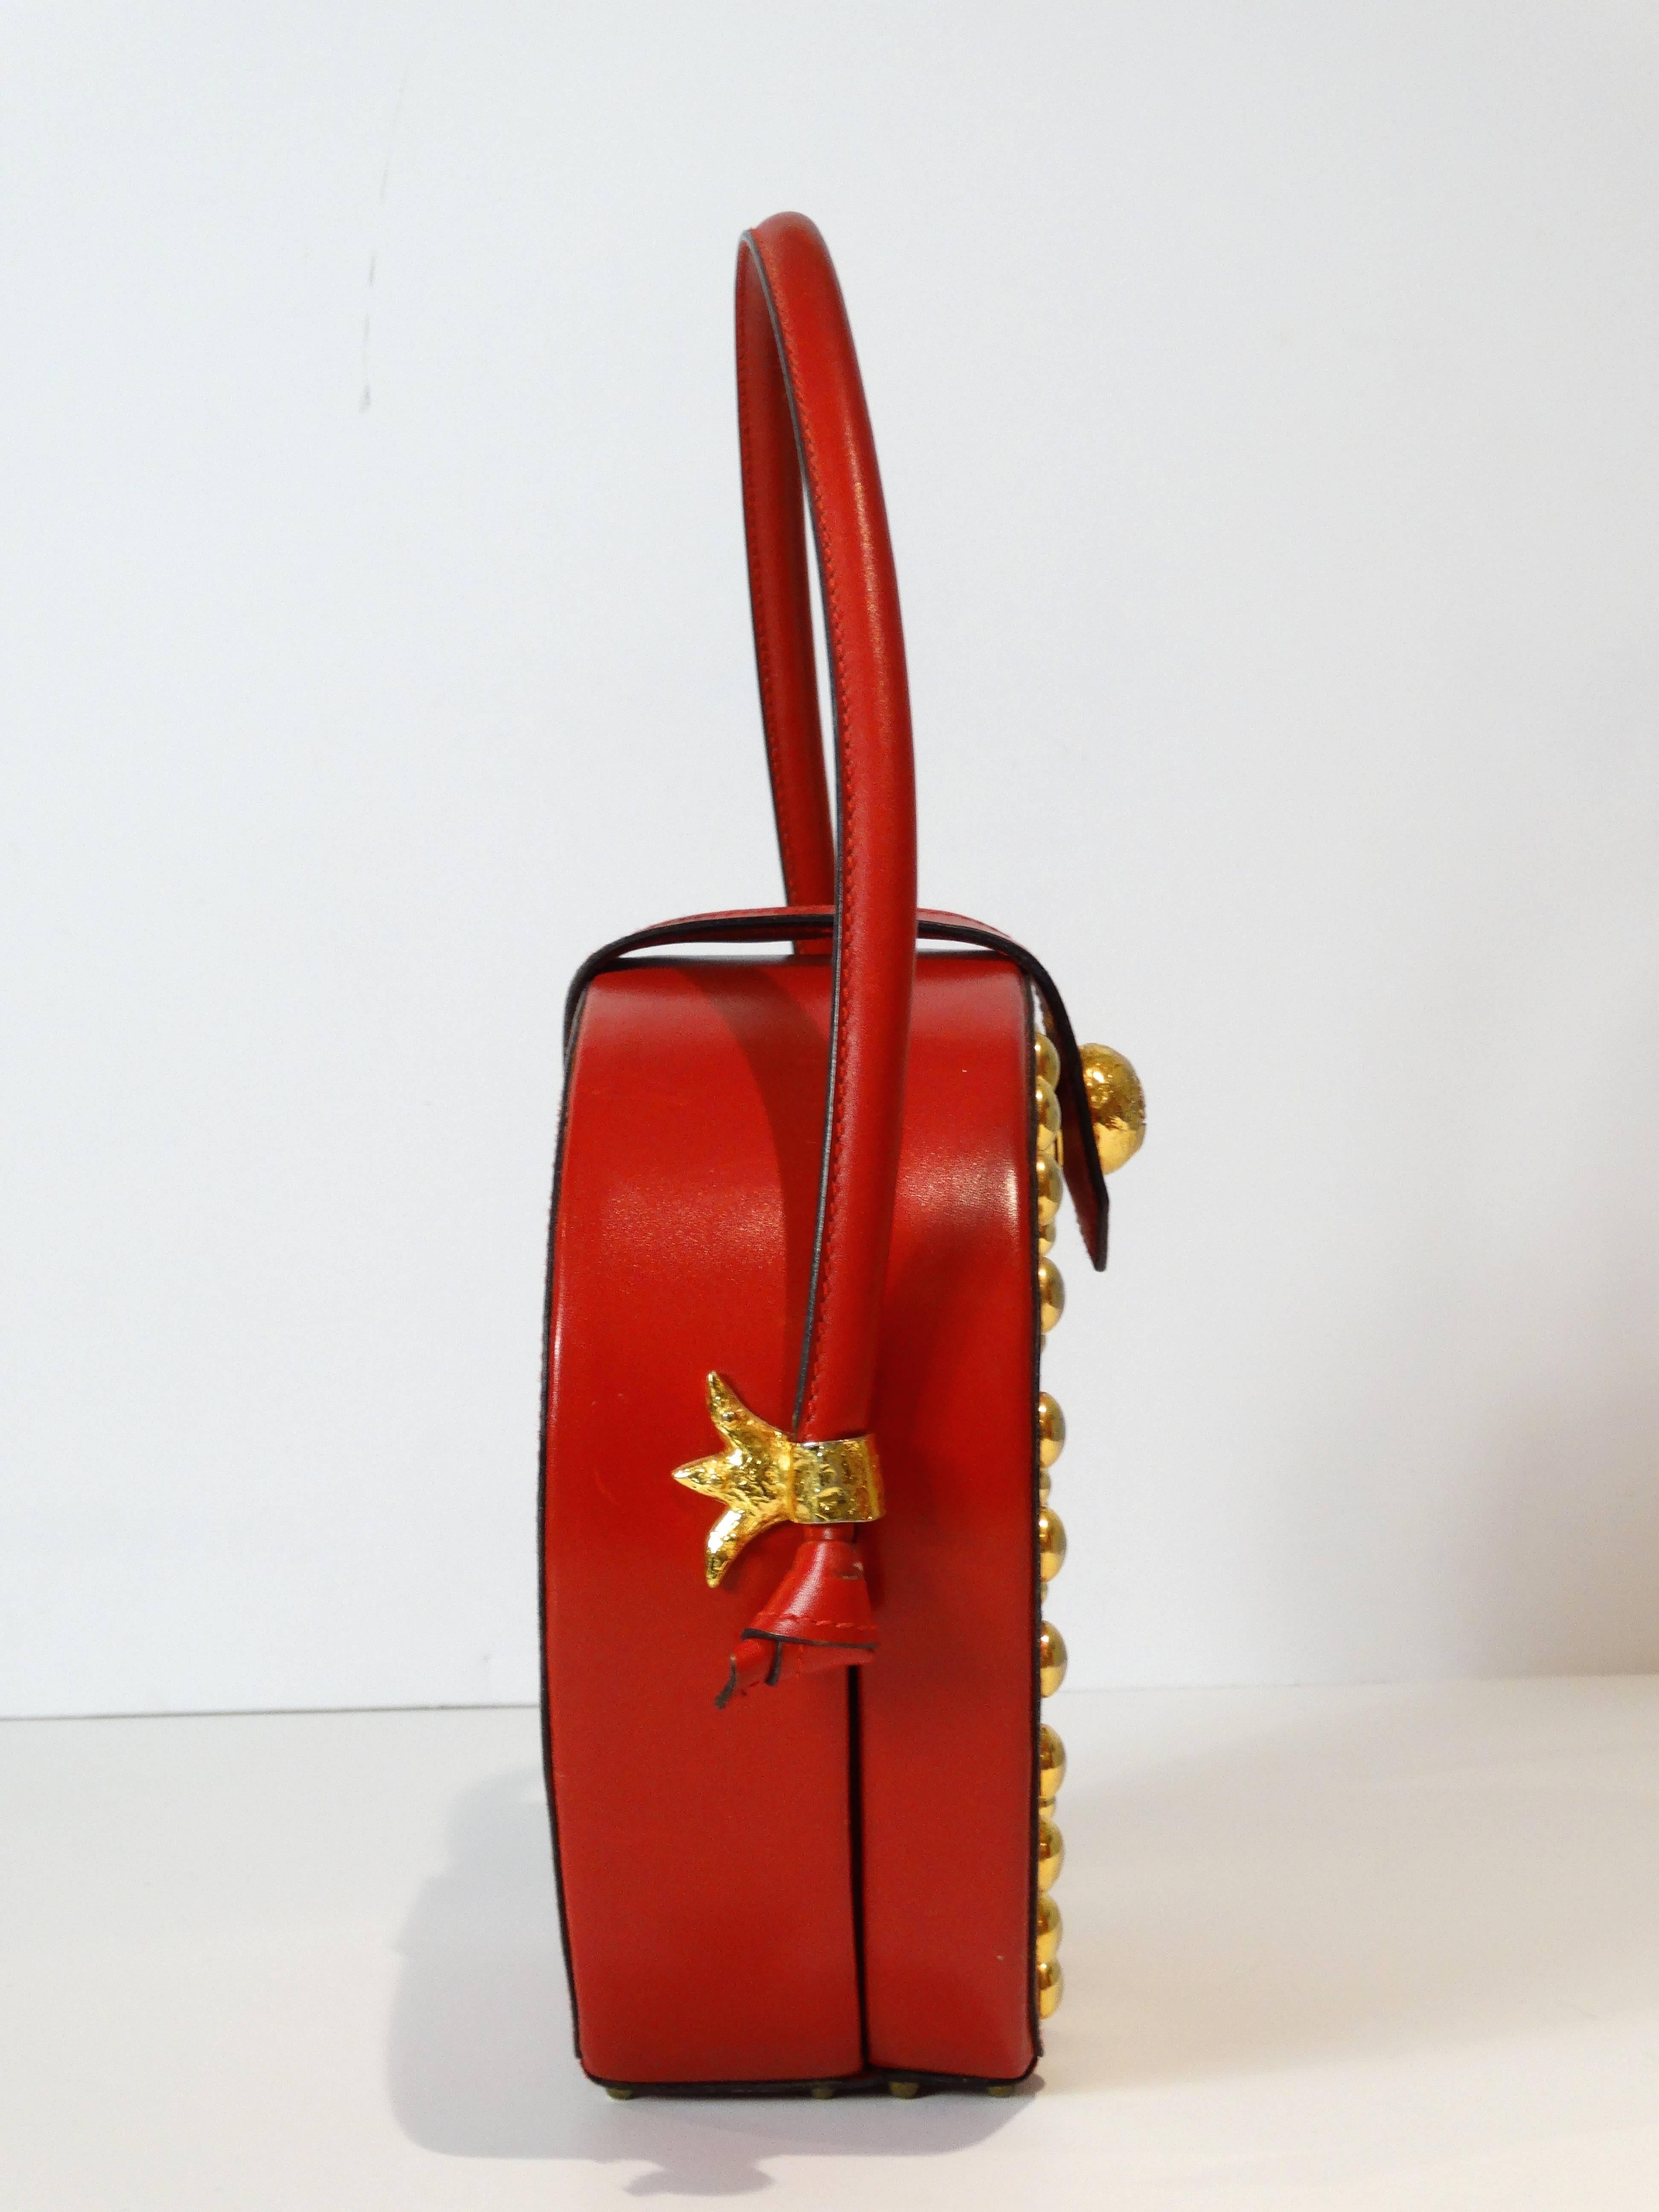 1993 CHRISTIAN LACROIX very rare and exceptional handbag comprising of two red leather top handles, red leather, a cross stud design on the front of the handbag in gold studs. Red lining printed with the CL monogram snap closure comprising of a zip